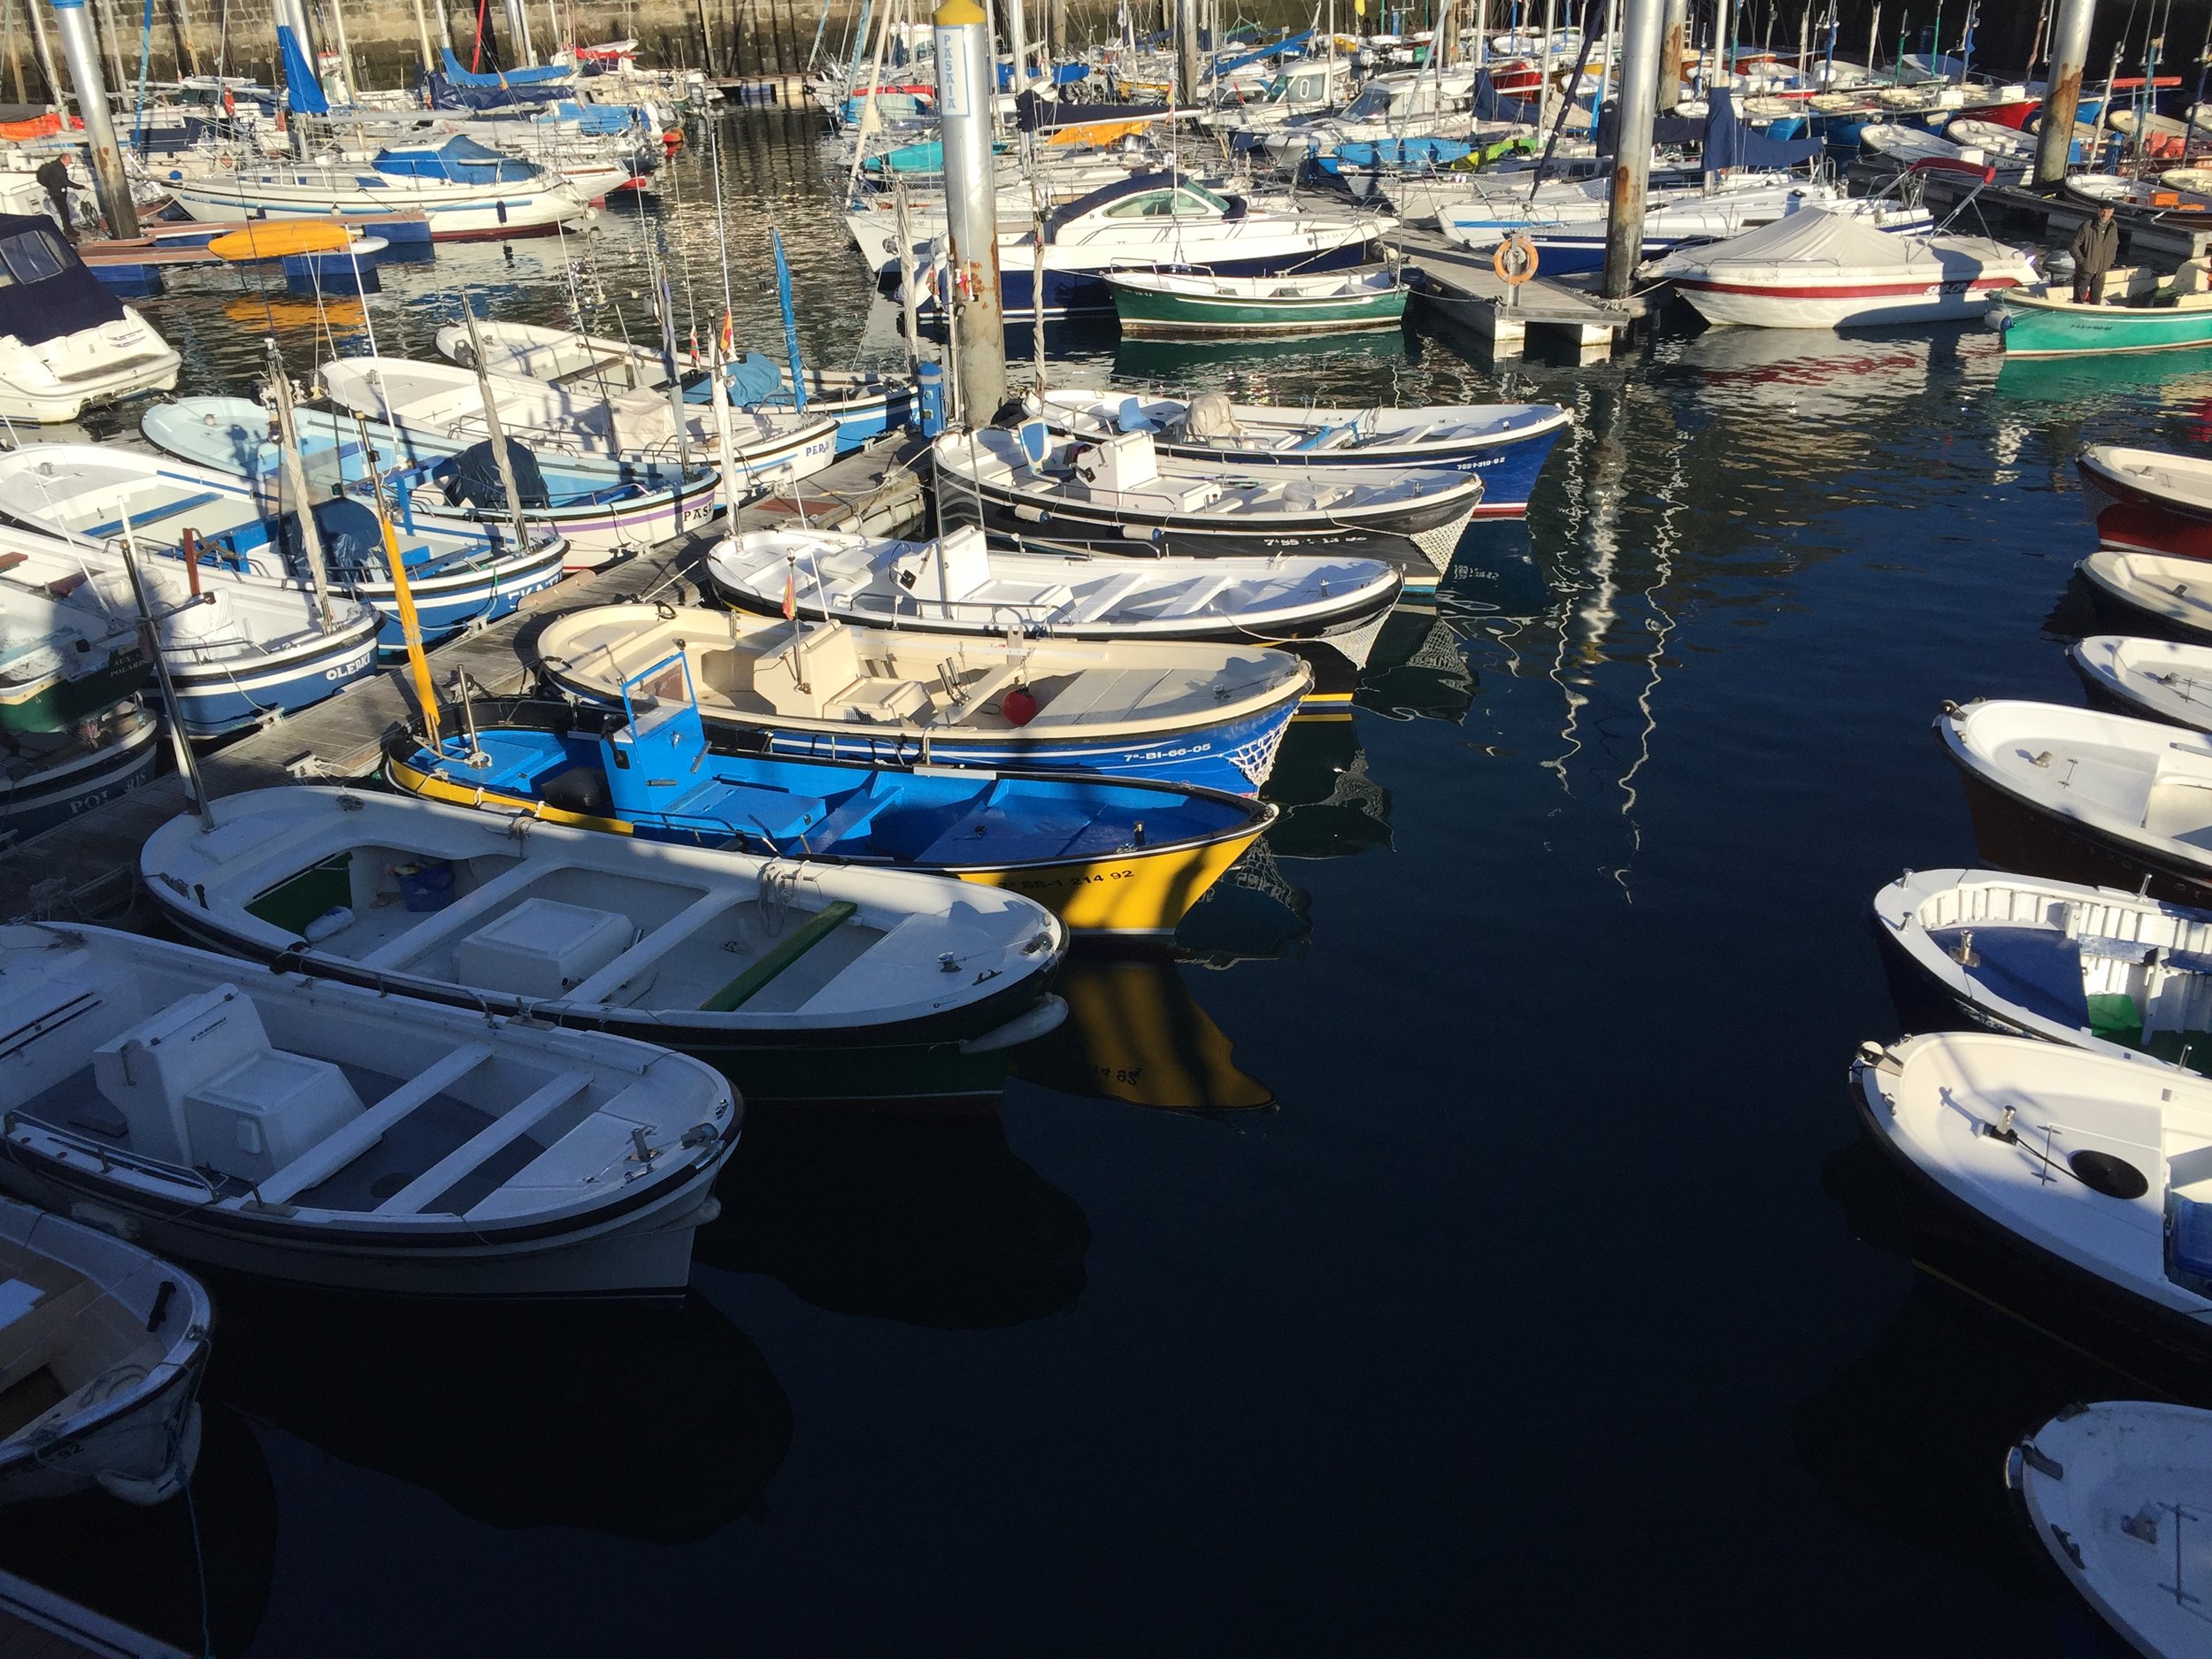 Boats lined up in the waterways | EAT.PRAY.MOVE Retreats | Basque Country, Spain